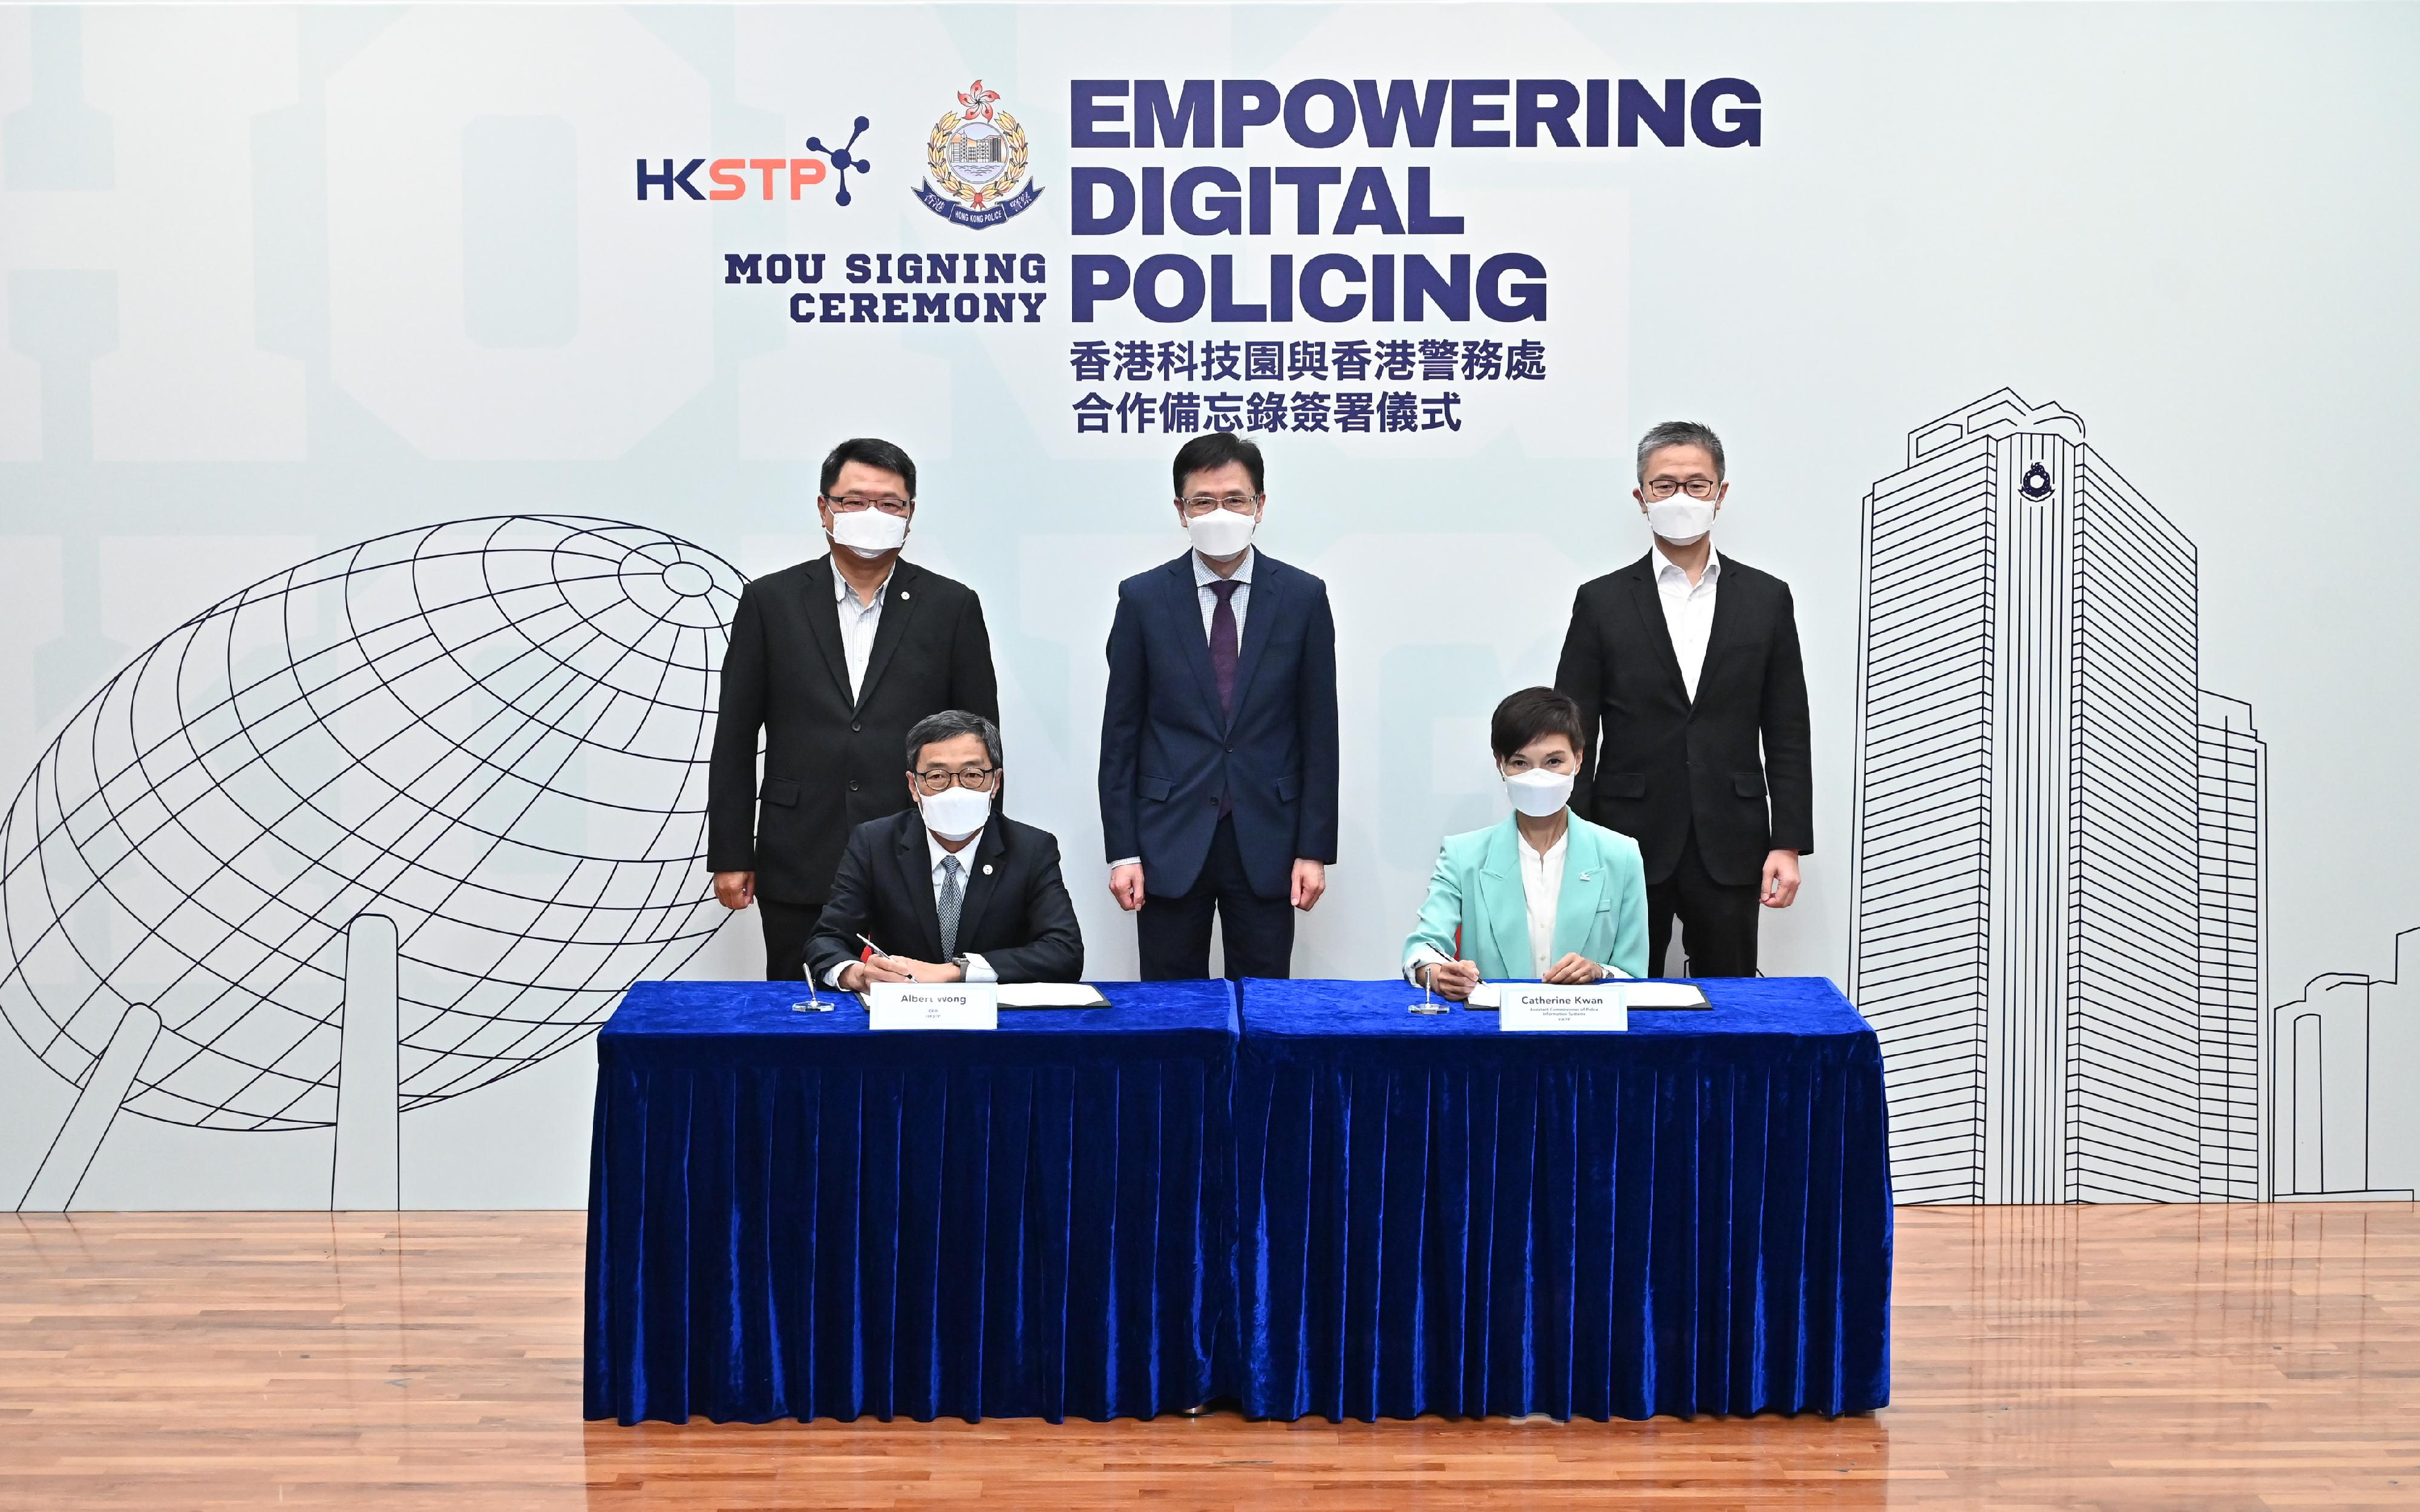 The Hong Kong Police Force and the Hong Kong Science and Technology Parks Corporation (HKSTP) today (September 6) signed a Memorandum of Understanding (MoU). Witnessed by the Secretary for Innovation, Technology and Industry, Professor Sun Dong (back row, centre); the Chairman of the HKSTP, Dr Sunny Chai (back row, left) and the Commissioner of Police, Mr Siu Chak-yee (back row, right), the Chief Executive Officer of the HKSTP, Mr Albert Wong (front row, left) and Assistant Commissioner of Police, Information Systems, Ms Catherine Kwan (front row, right) signed the MoU to drive digital policing and nurture innovation and technology talents.